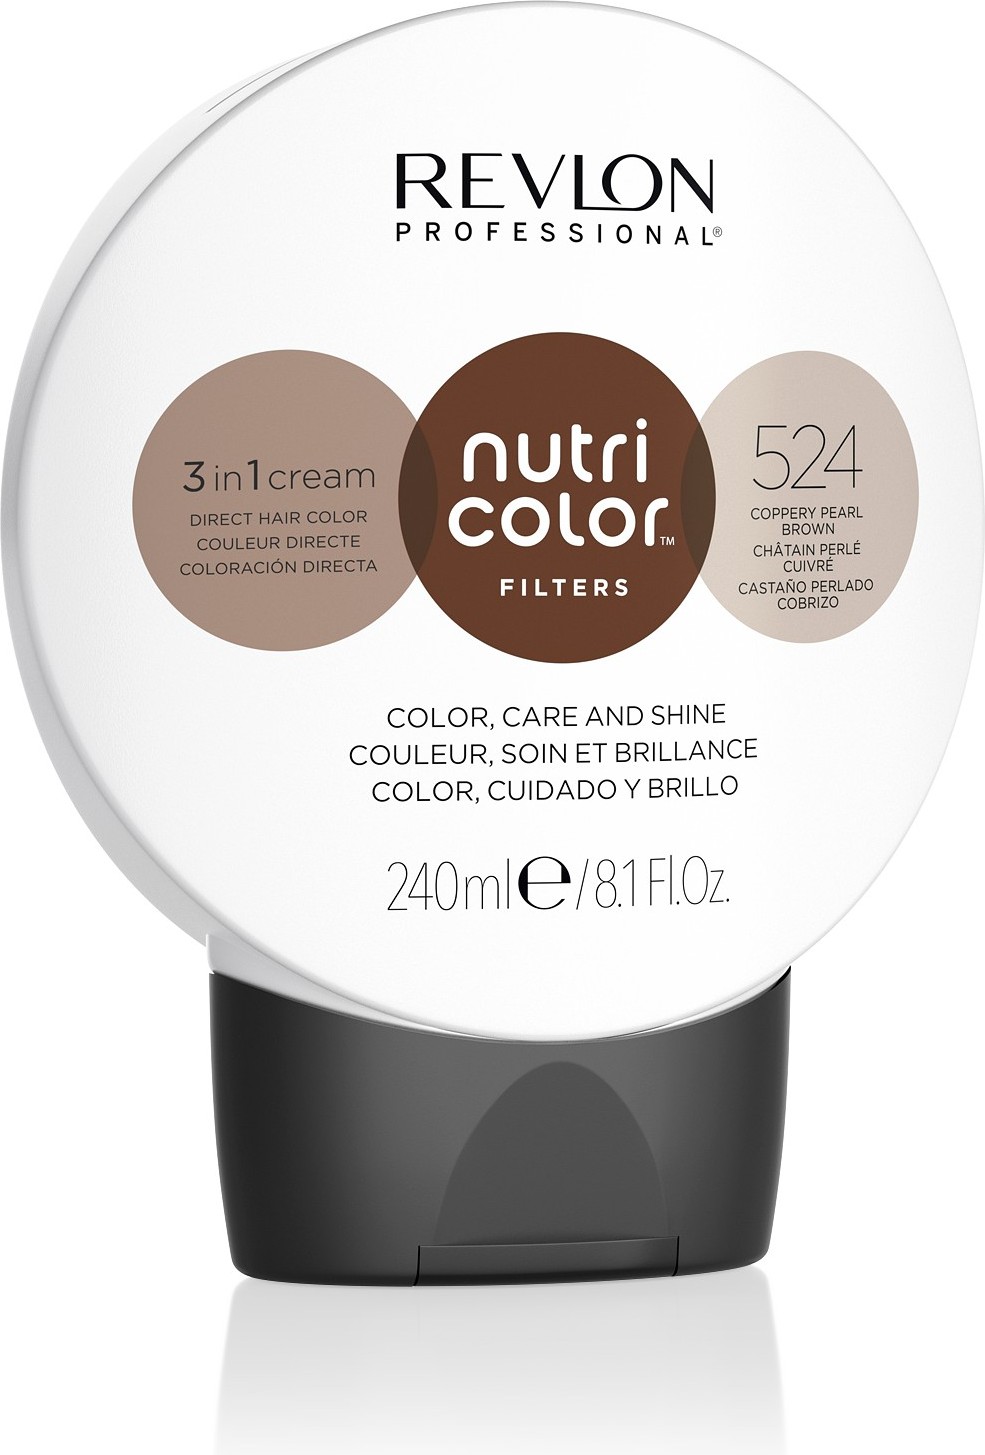  Revlon Professional Nutri Color Filters 524 Coppery Pearl Brown 240 ml 